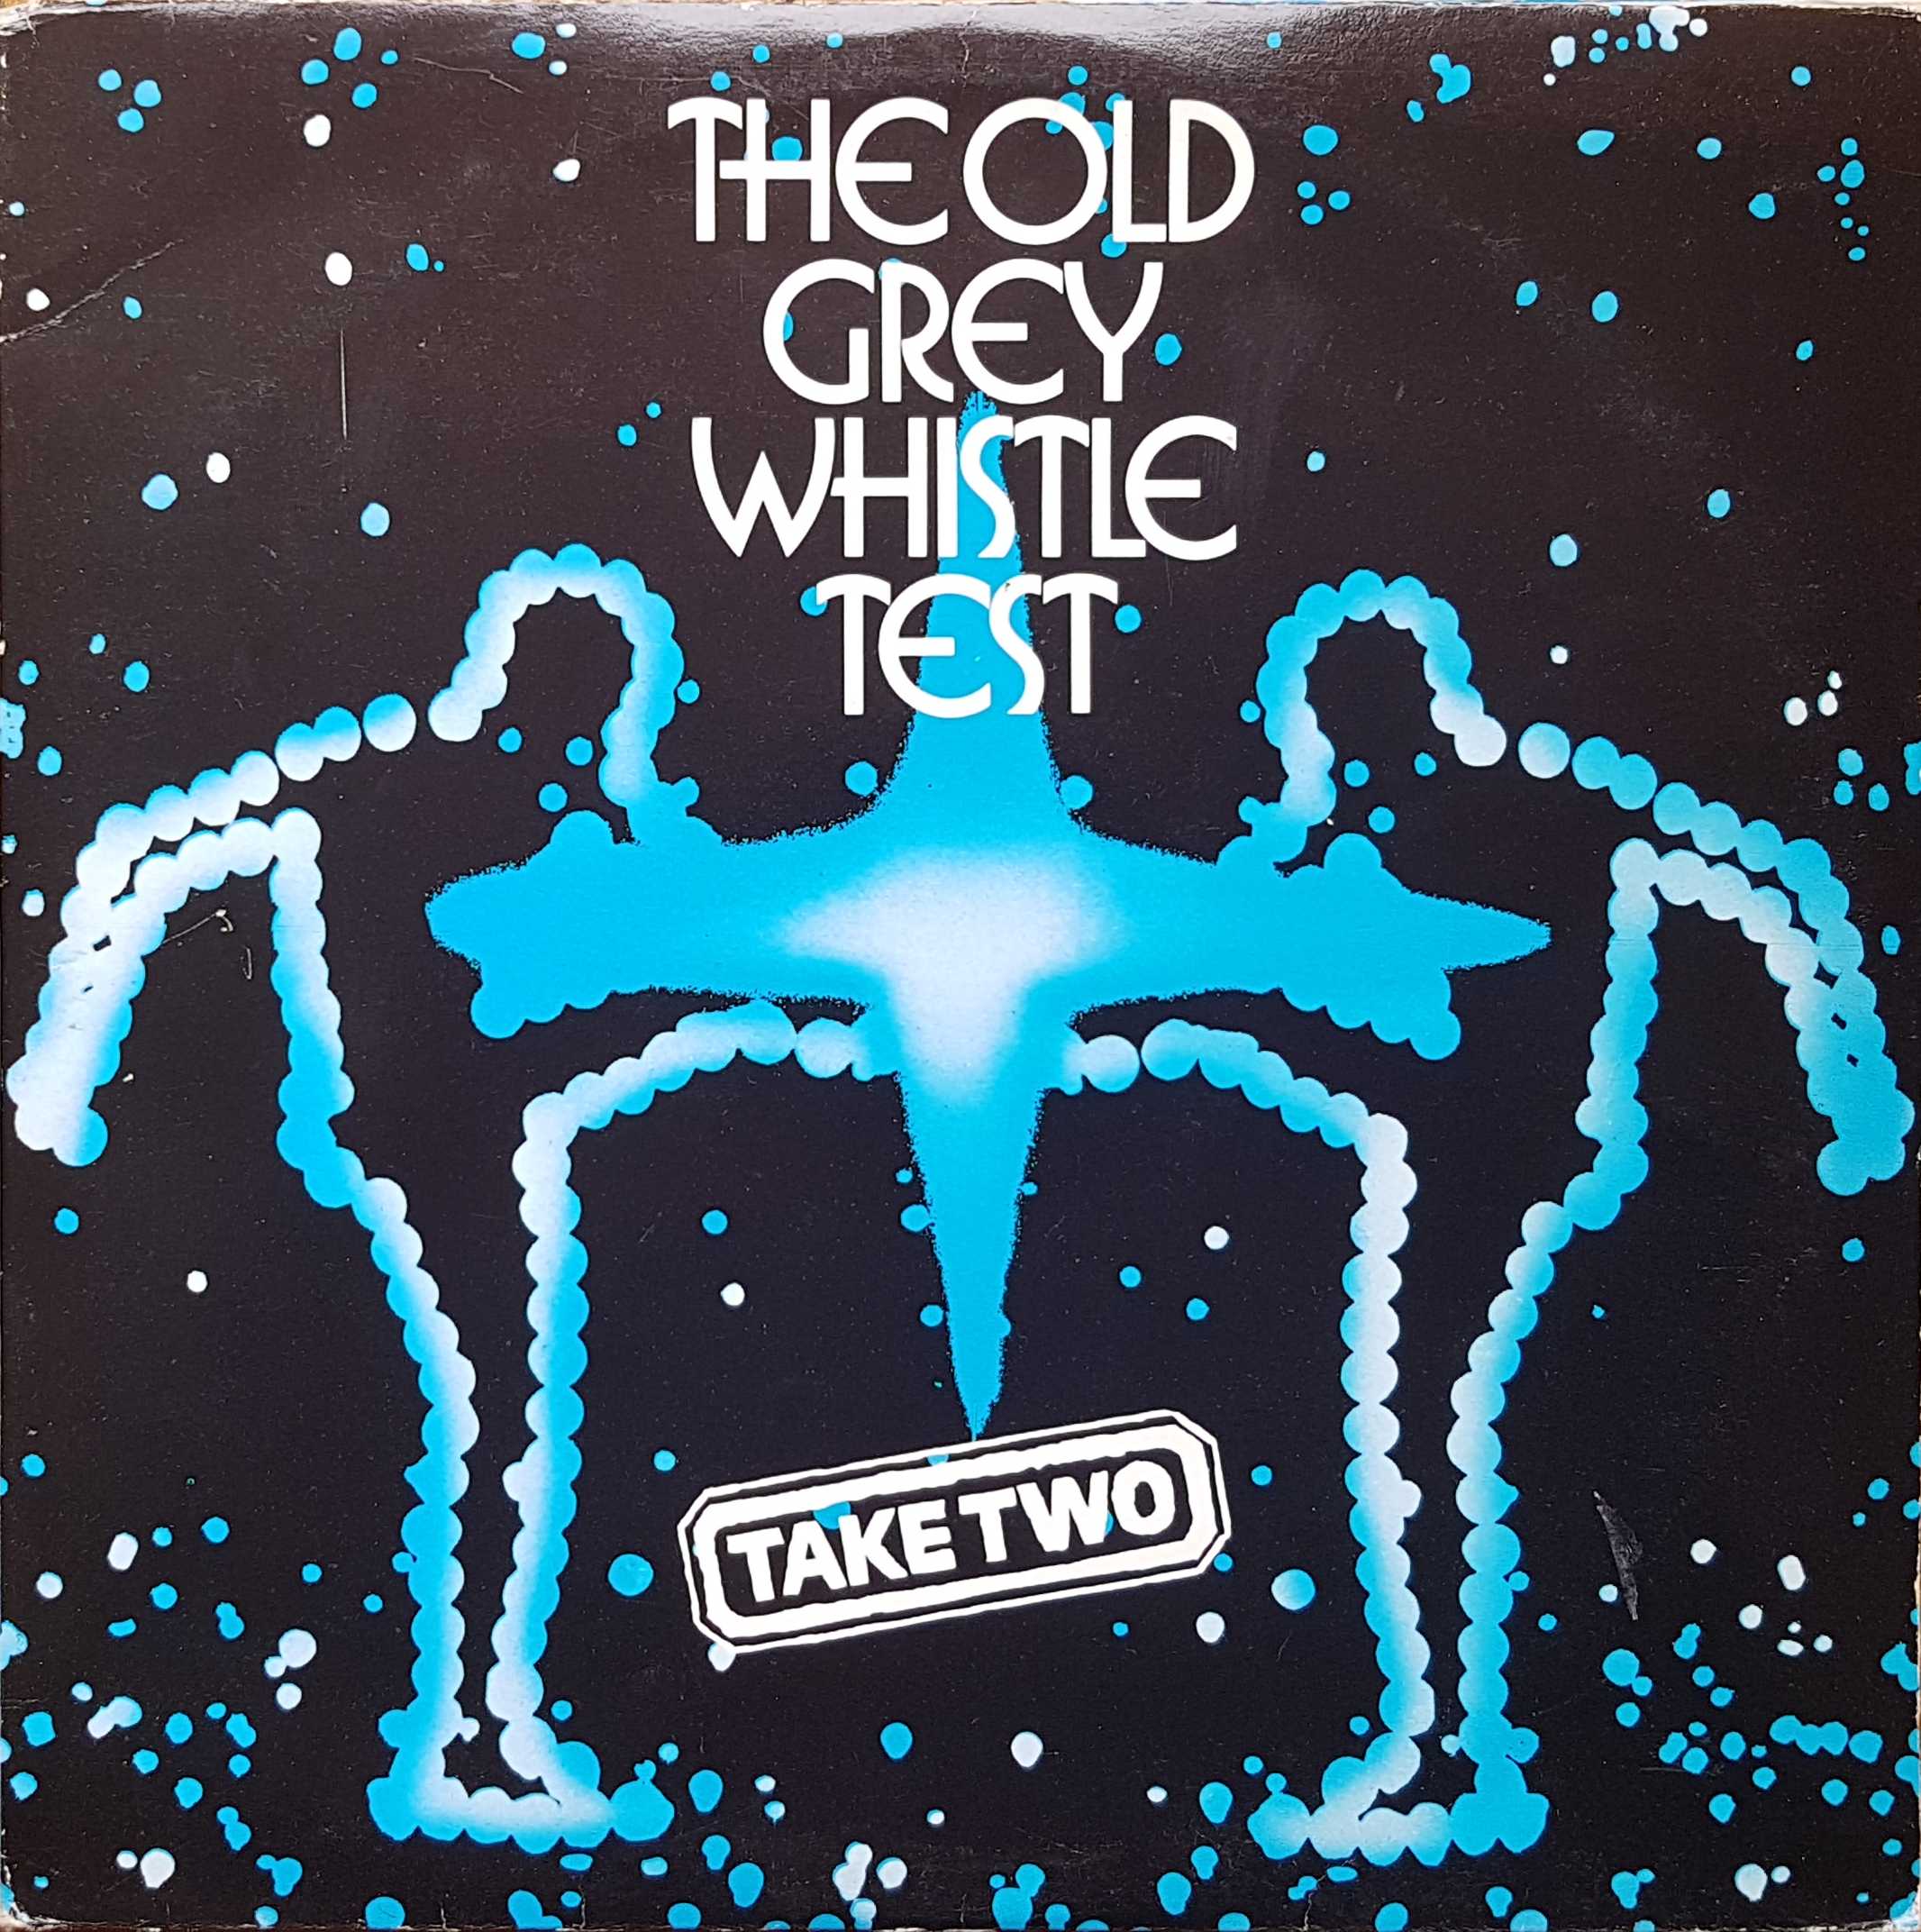 Picture of The Old Grey Whistle Test - Take 2 by artist Various from the BBC albums - Records and Tapes library